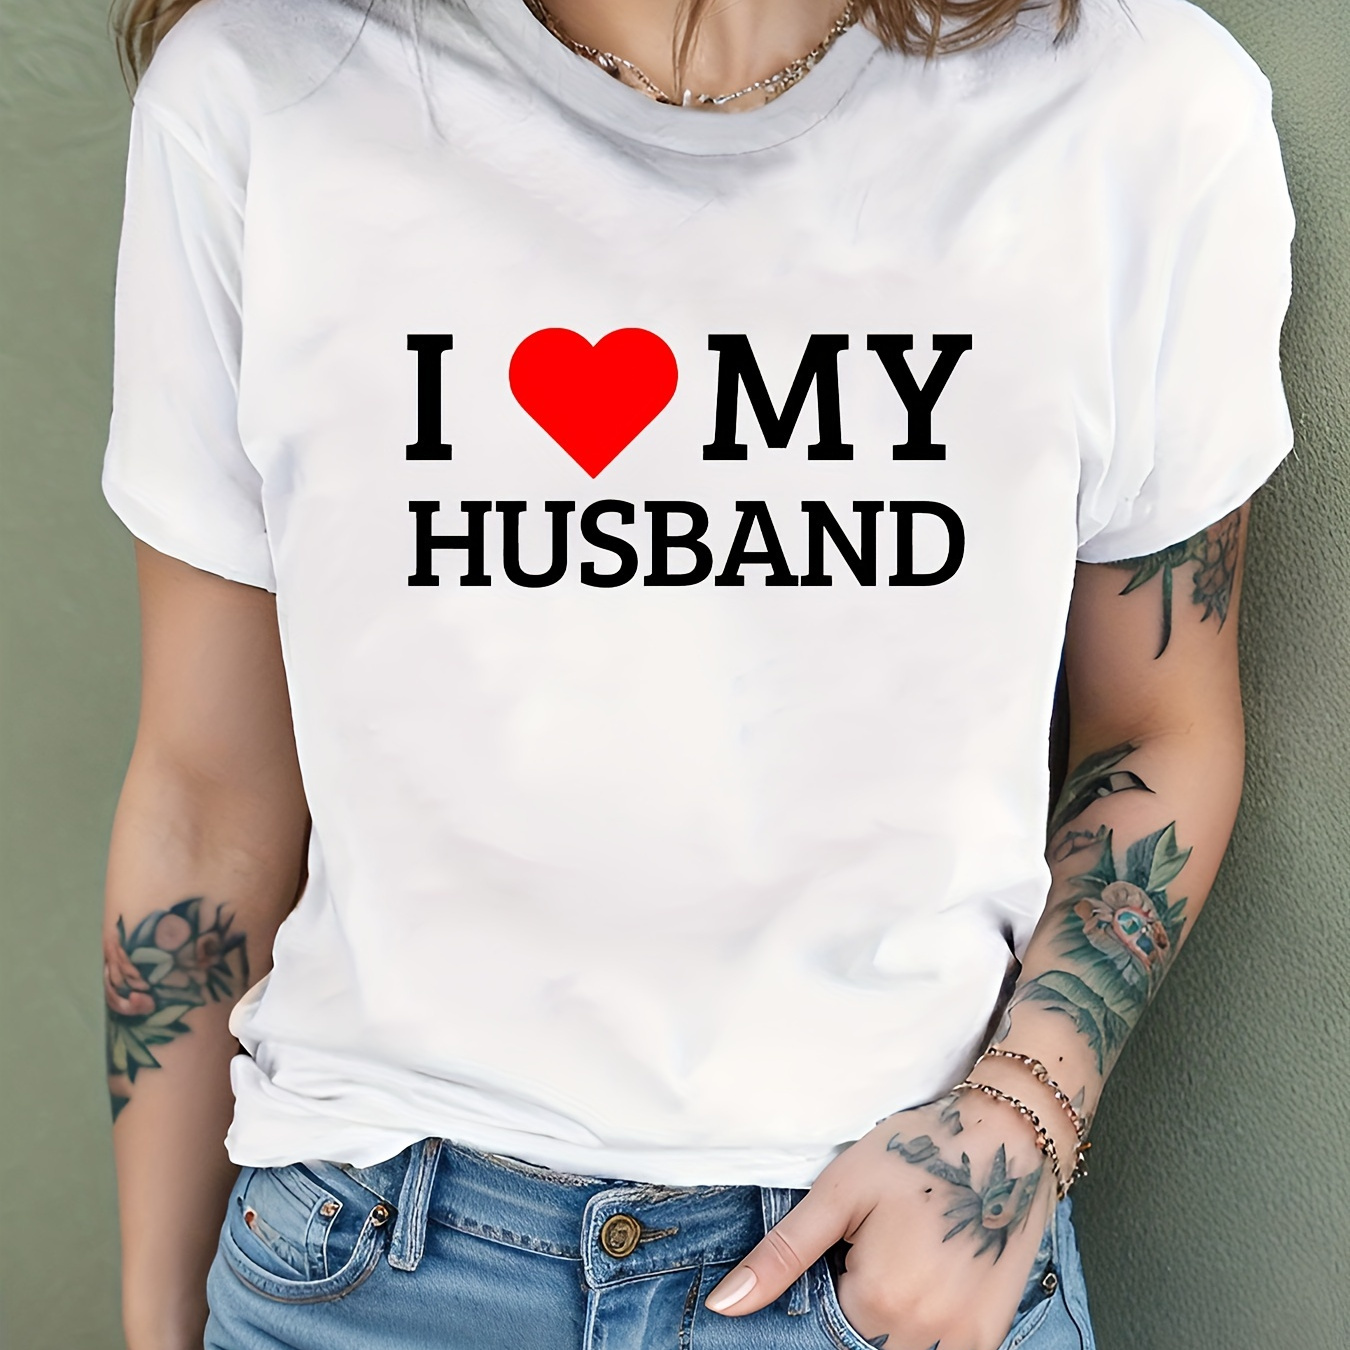 

I Love My Husband Graphic Round Neck Sports Tee, Short Sleeves Casual Workout T-shirt Top, Women's Activewear